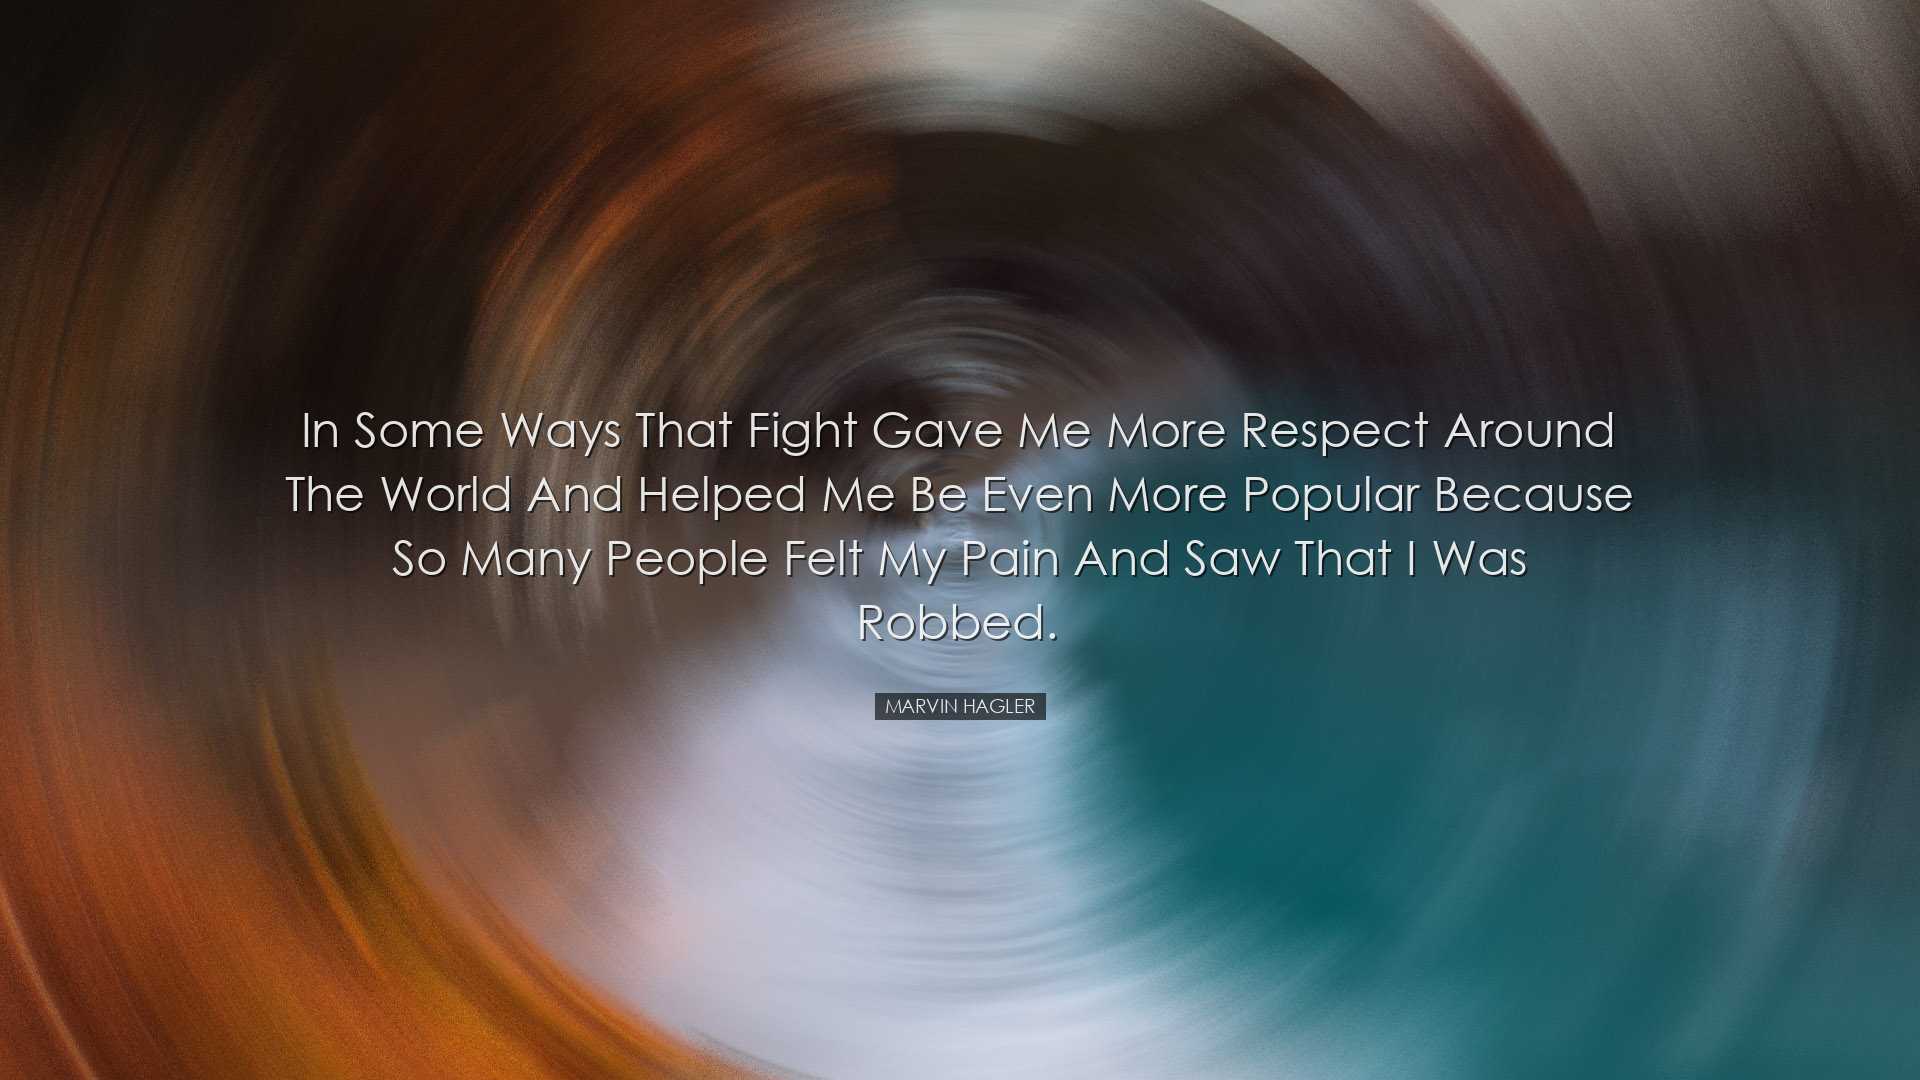 In some ways that fight gave me more respect around the world and